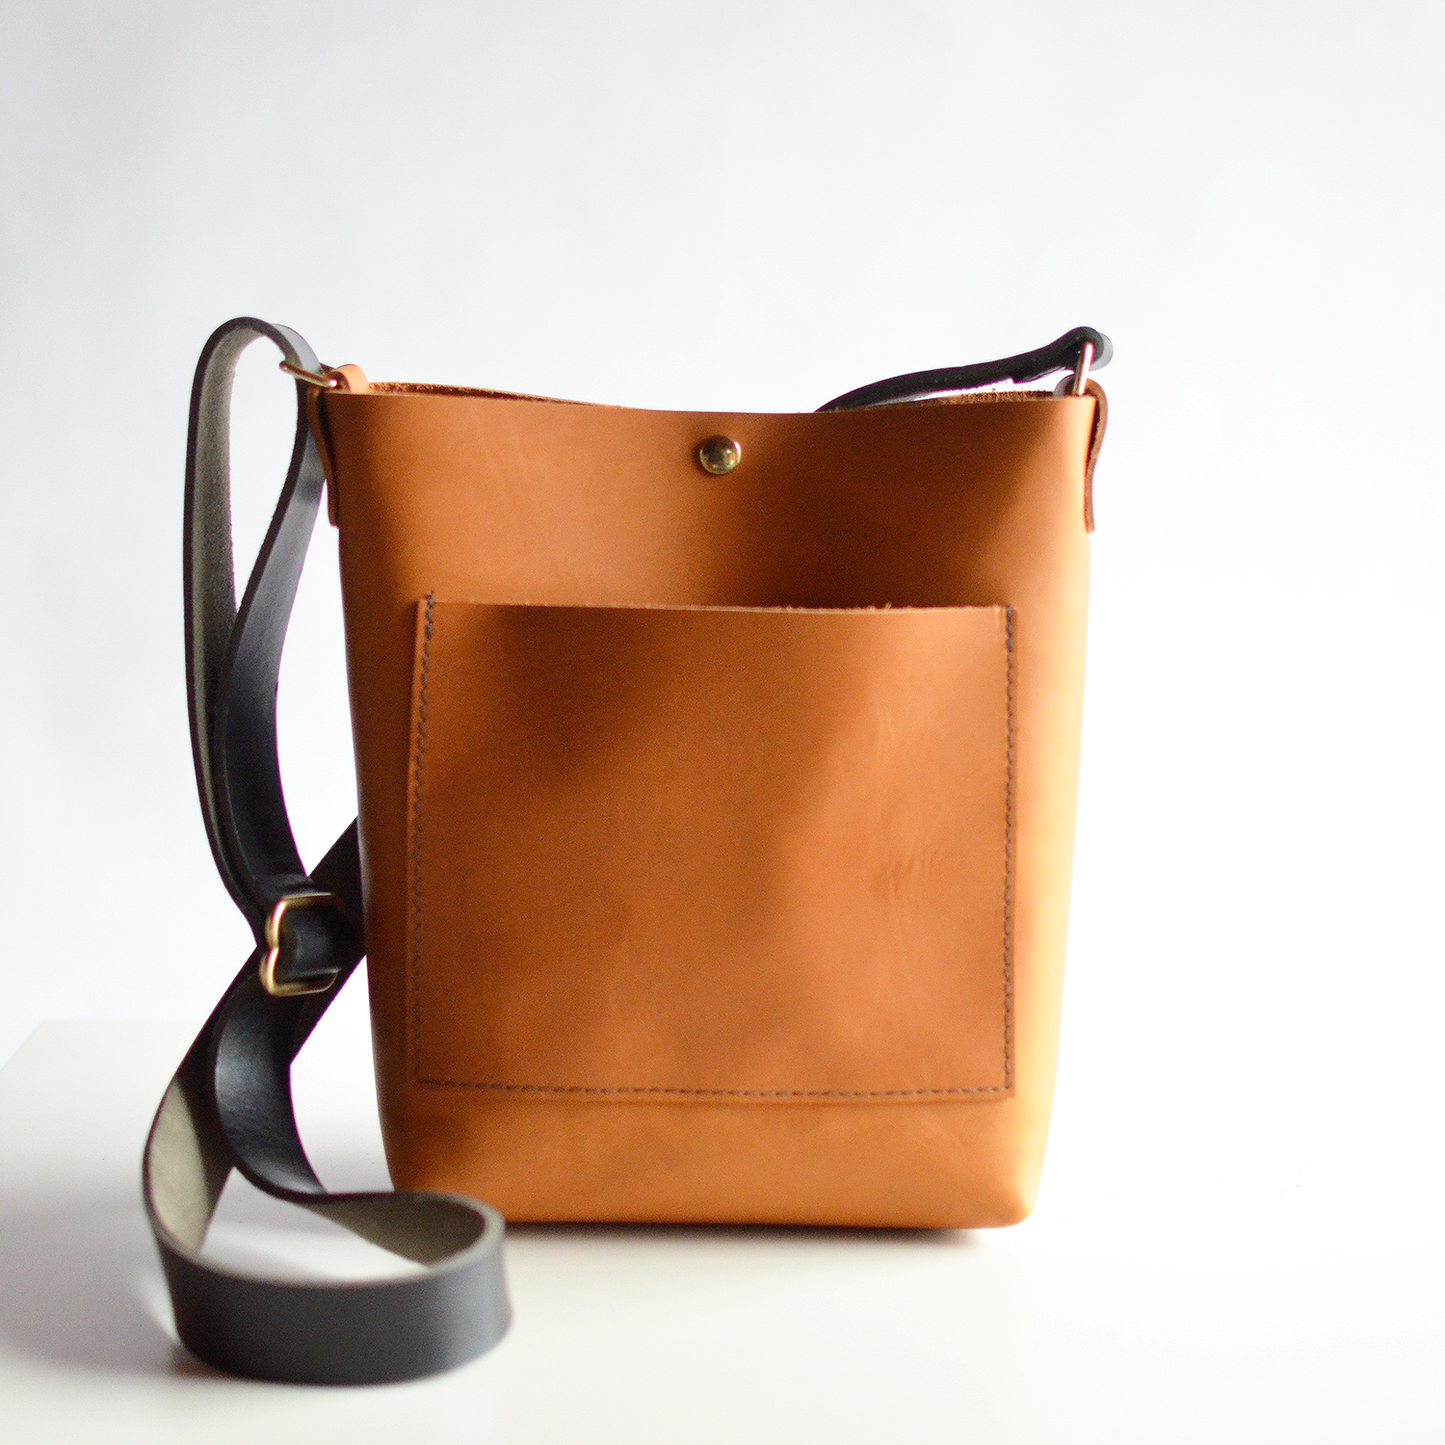 PARKER Small Convertible Crossbody - Honey Brown Leather